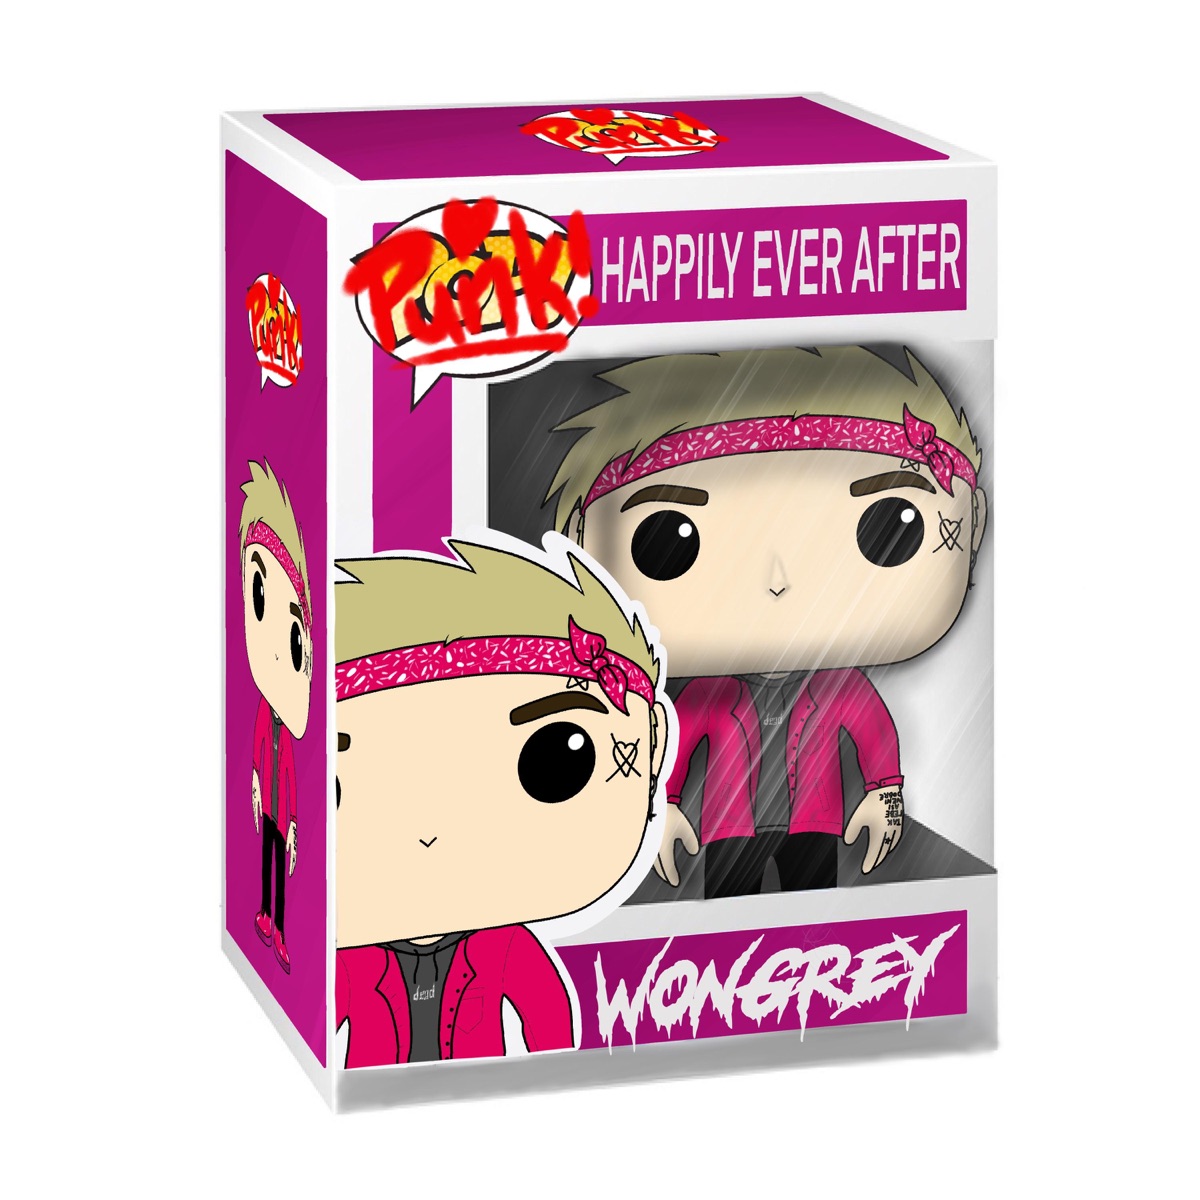 Wongrey - Happily ever after